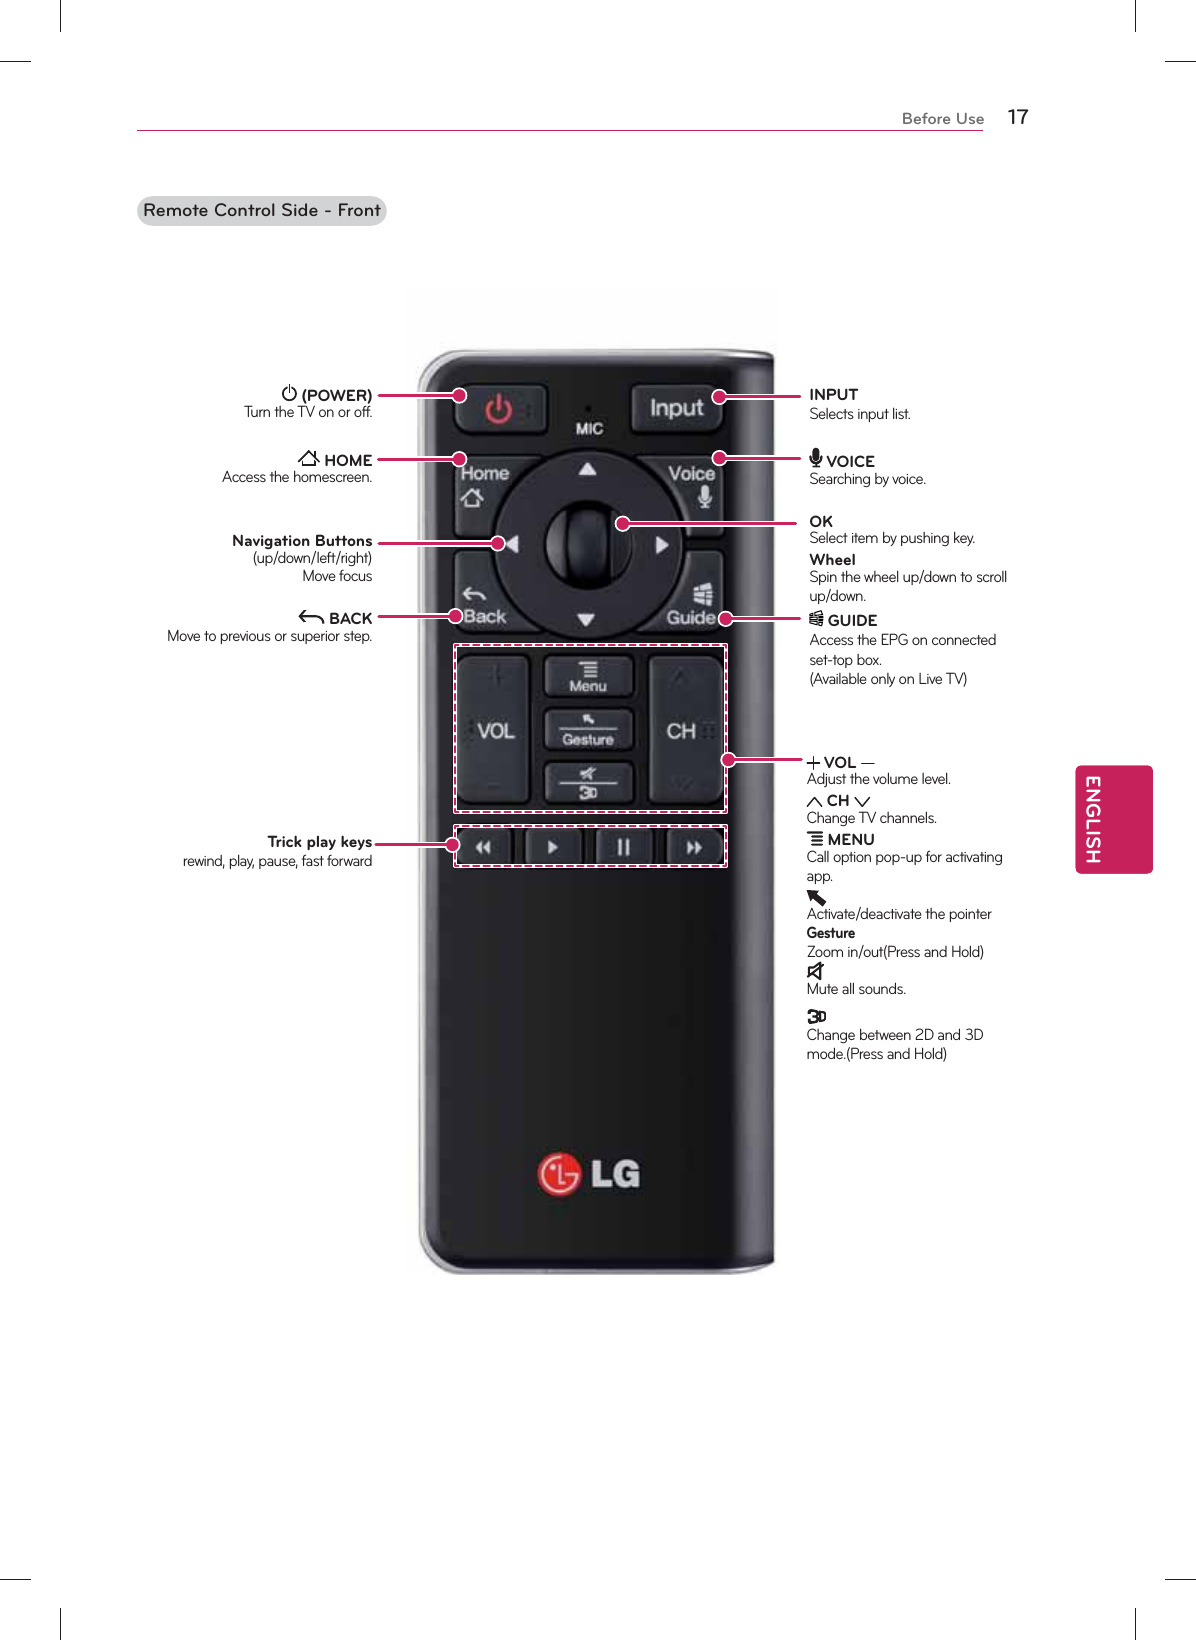 Lg tv owners manual download official site